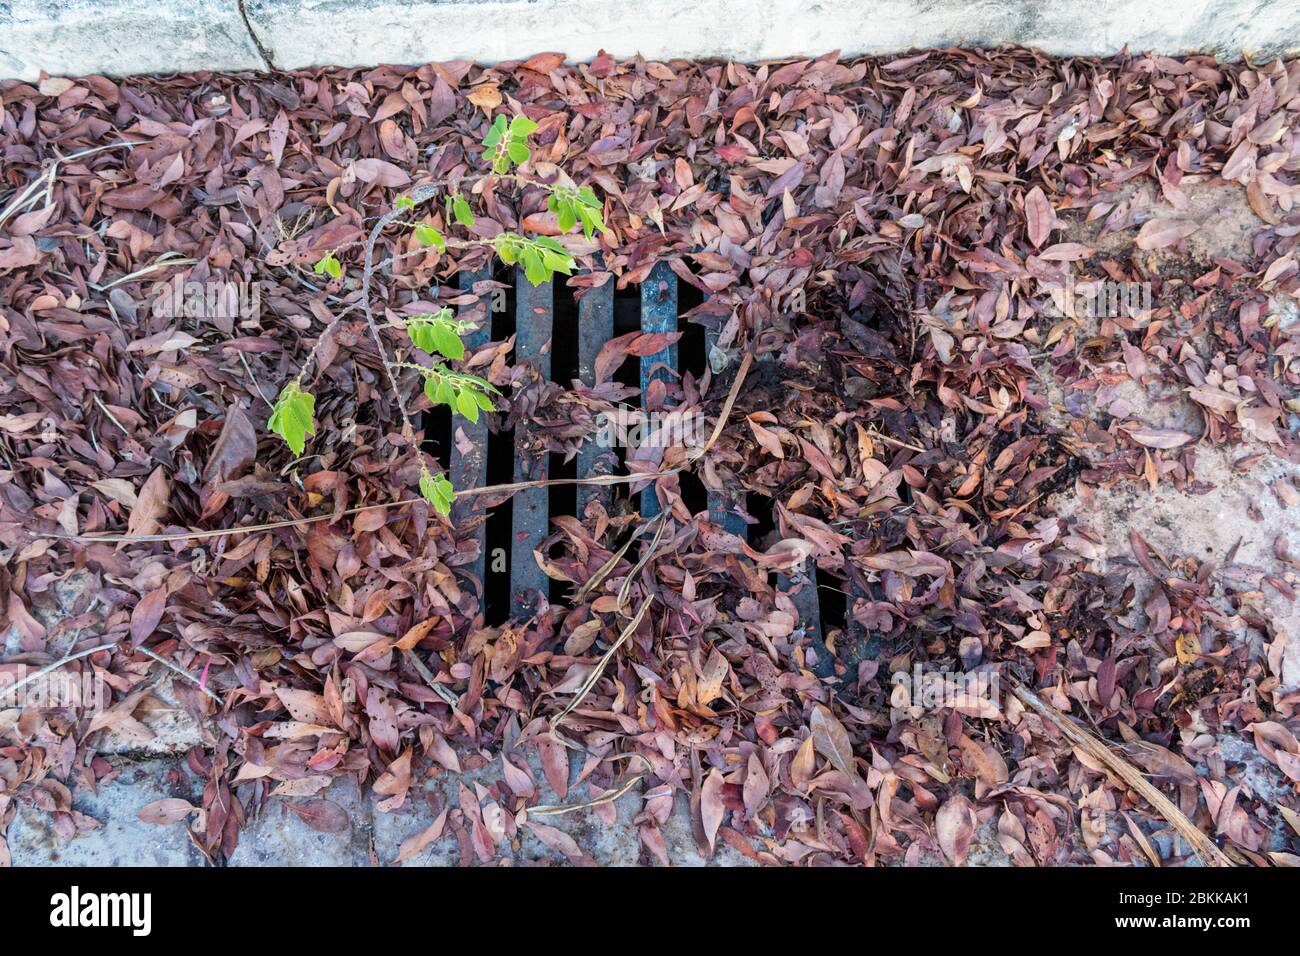 Autumn leaves clog sewage drain. No maintenance of abandoned areas lead to avoidable situations. Come the rainy season this will be a problem Stock Photo